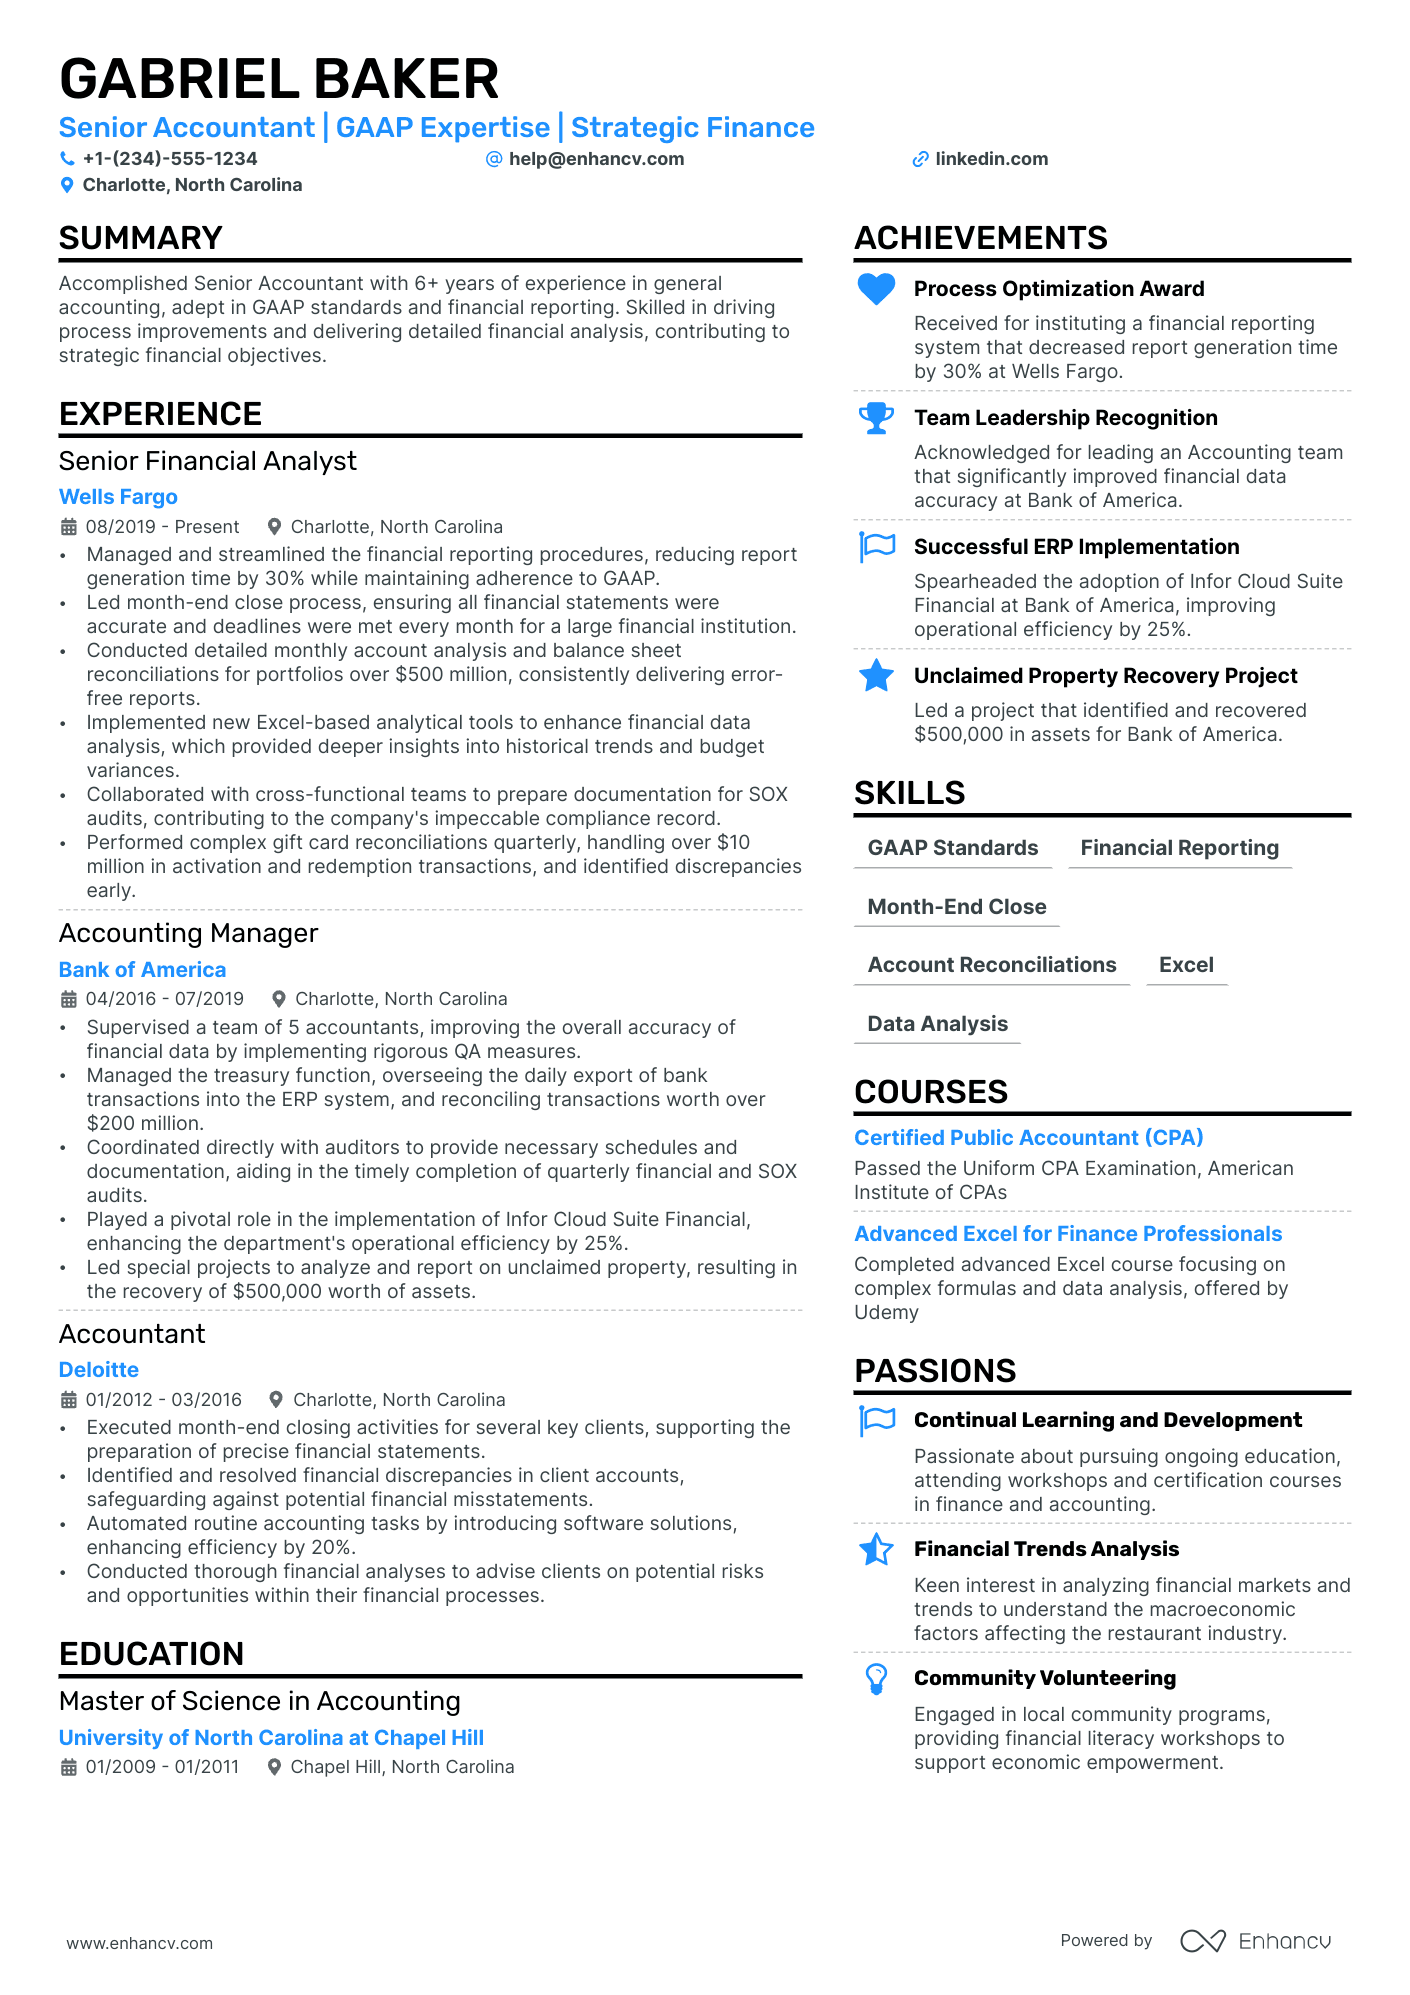 Public Accounting resume example